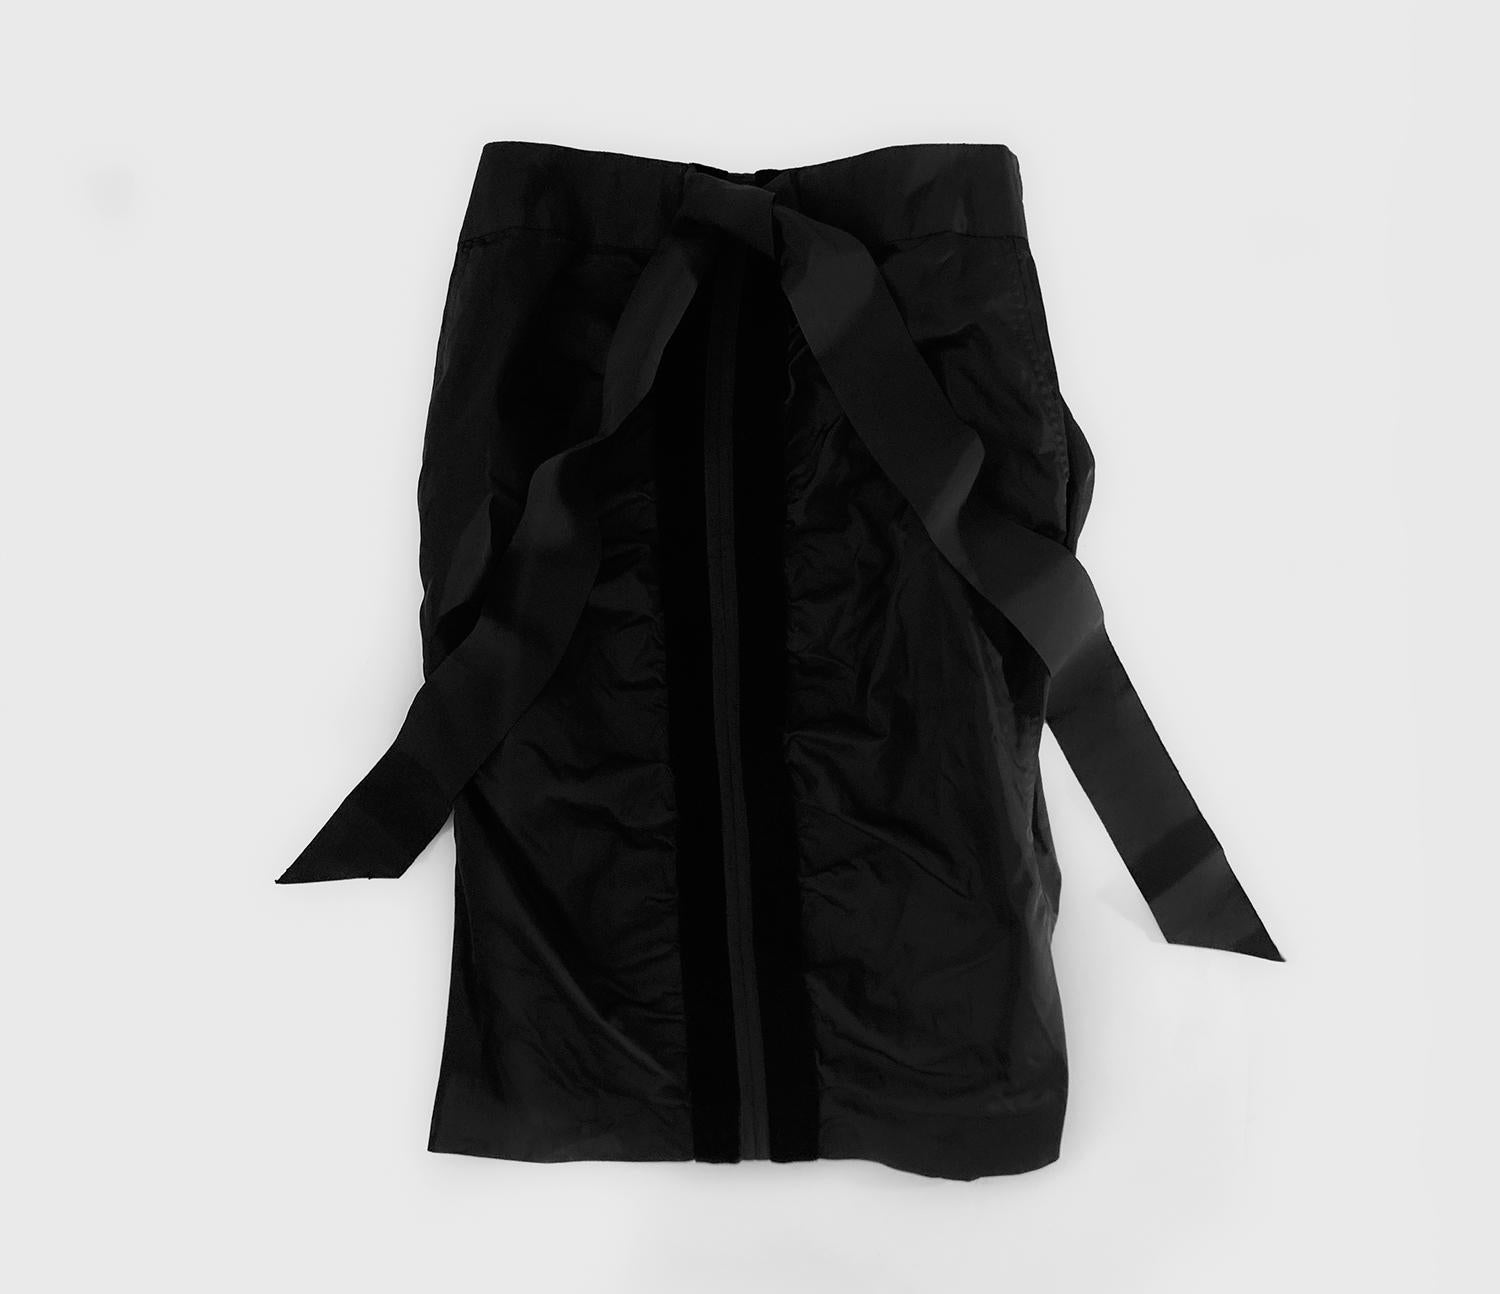 Iconic Tom Ford for Yves Saint Laurent FW2002 Runway Silk Black Corset and Skirt For Sale 2